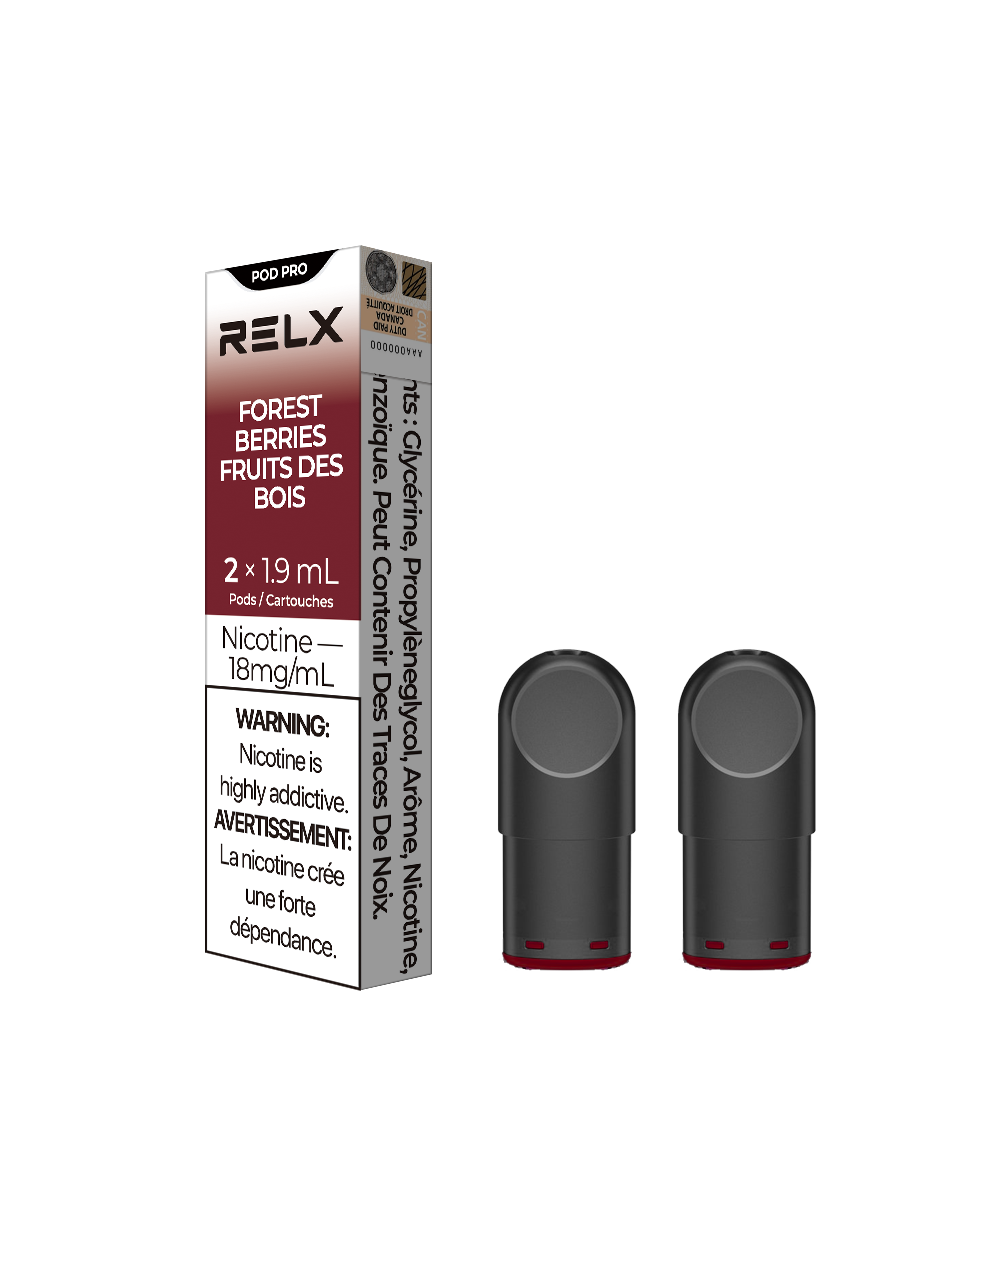 RELX PRO POD FOREST BERRIES